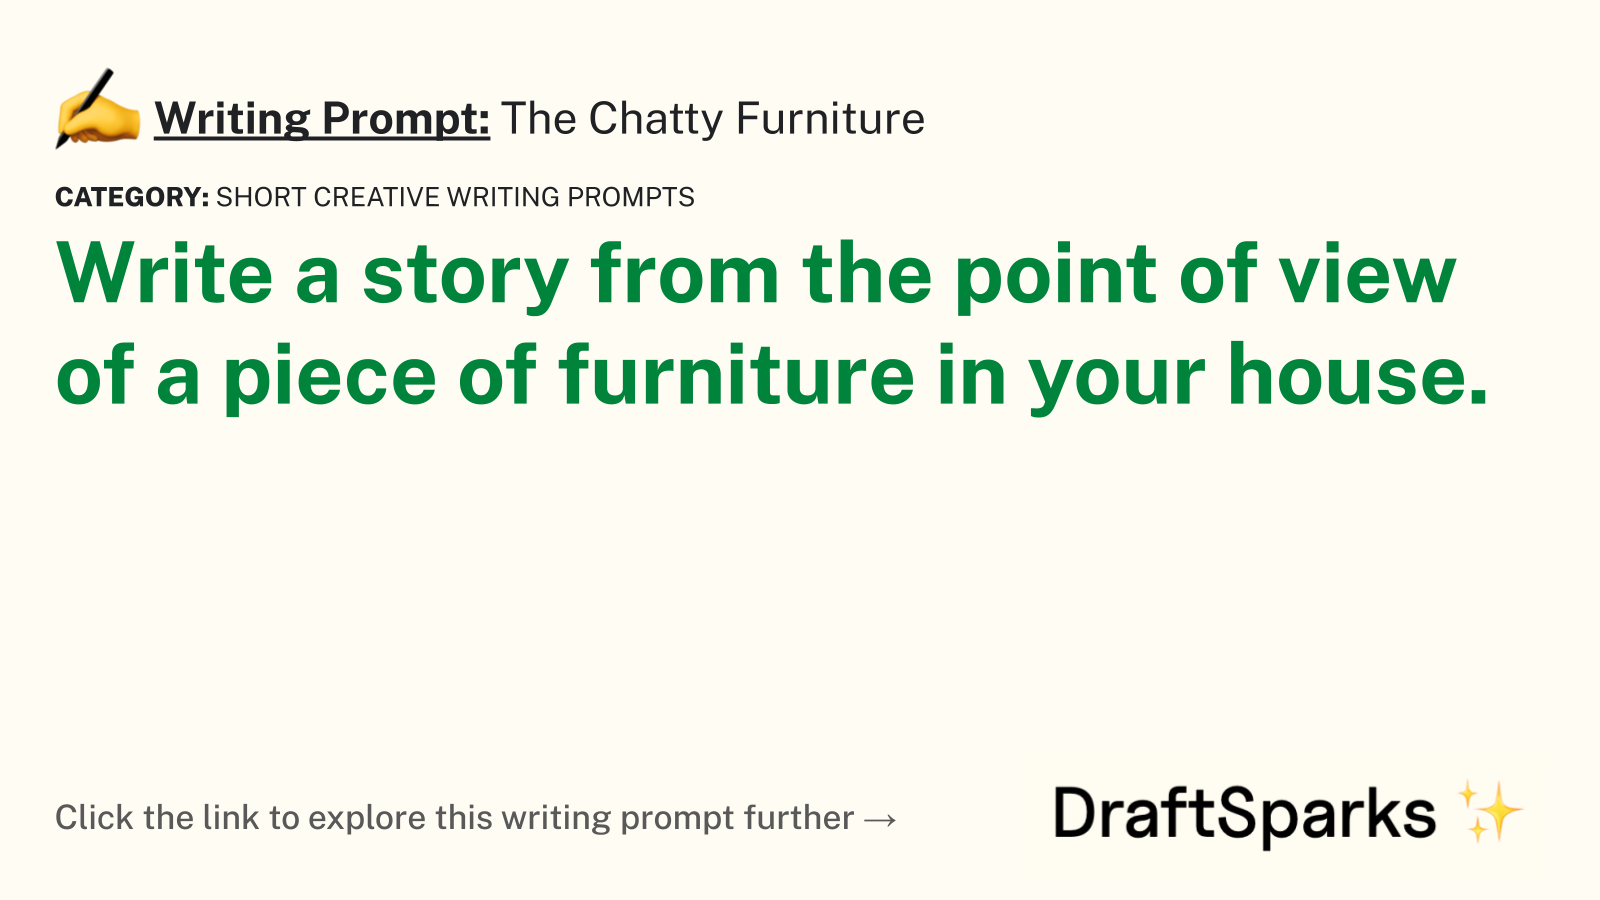 The Chatty Furniture